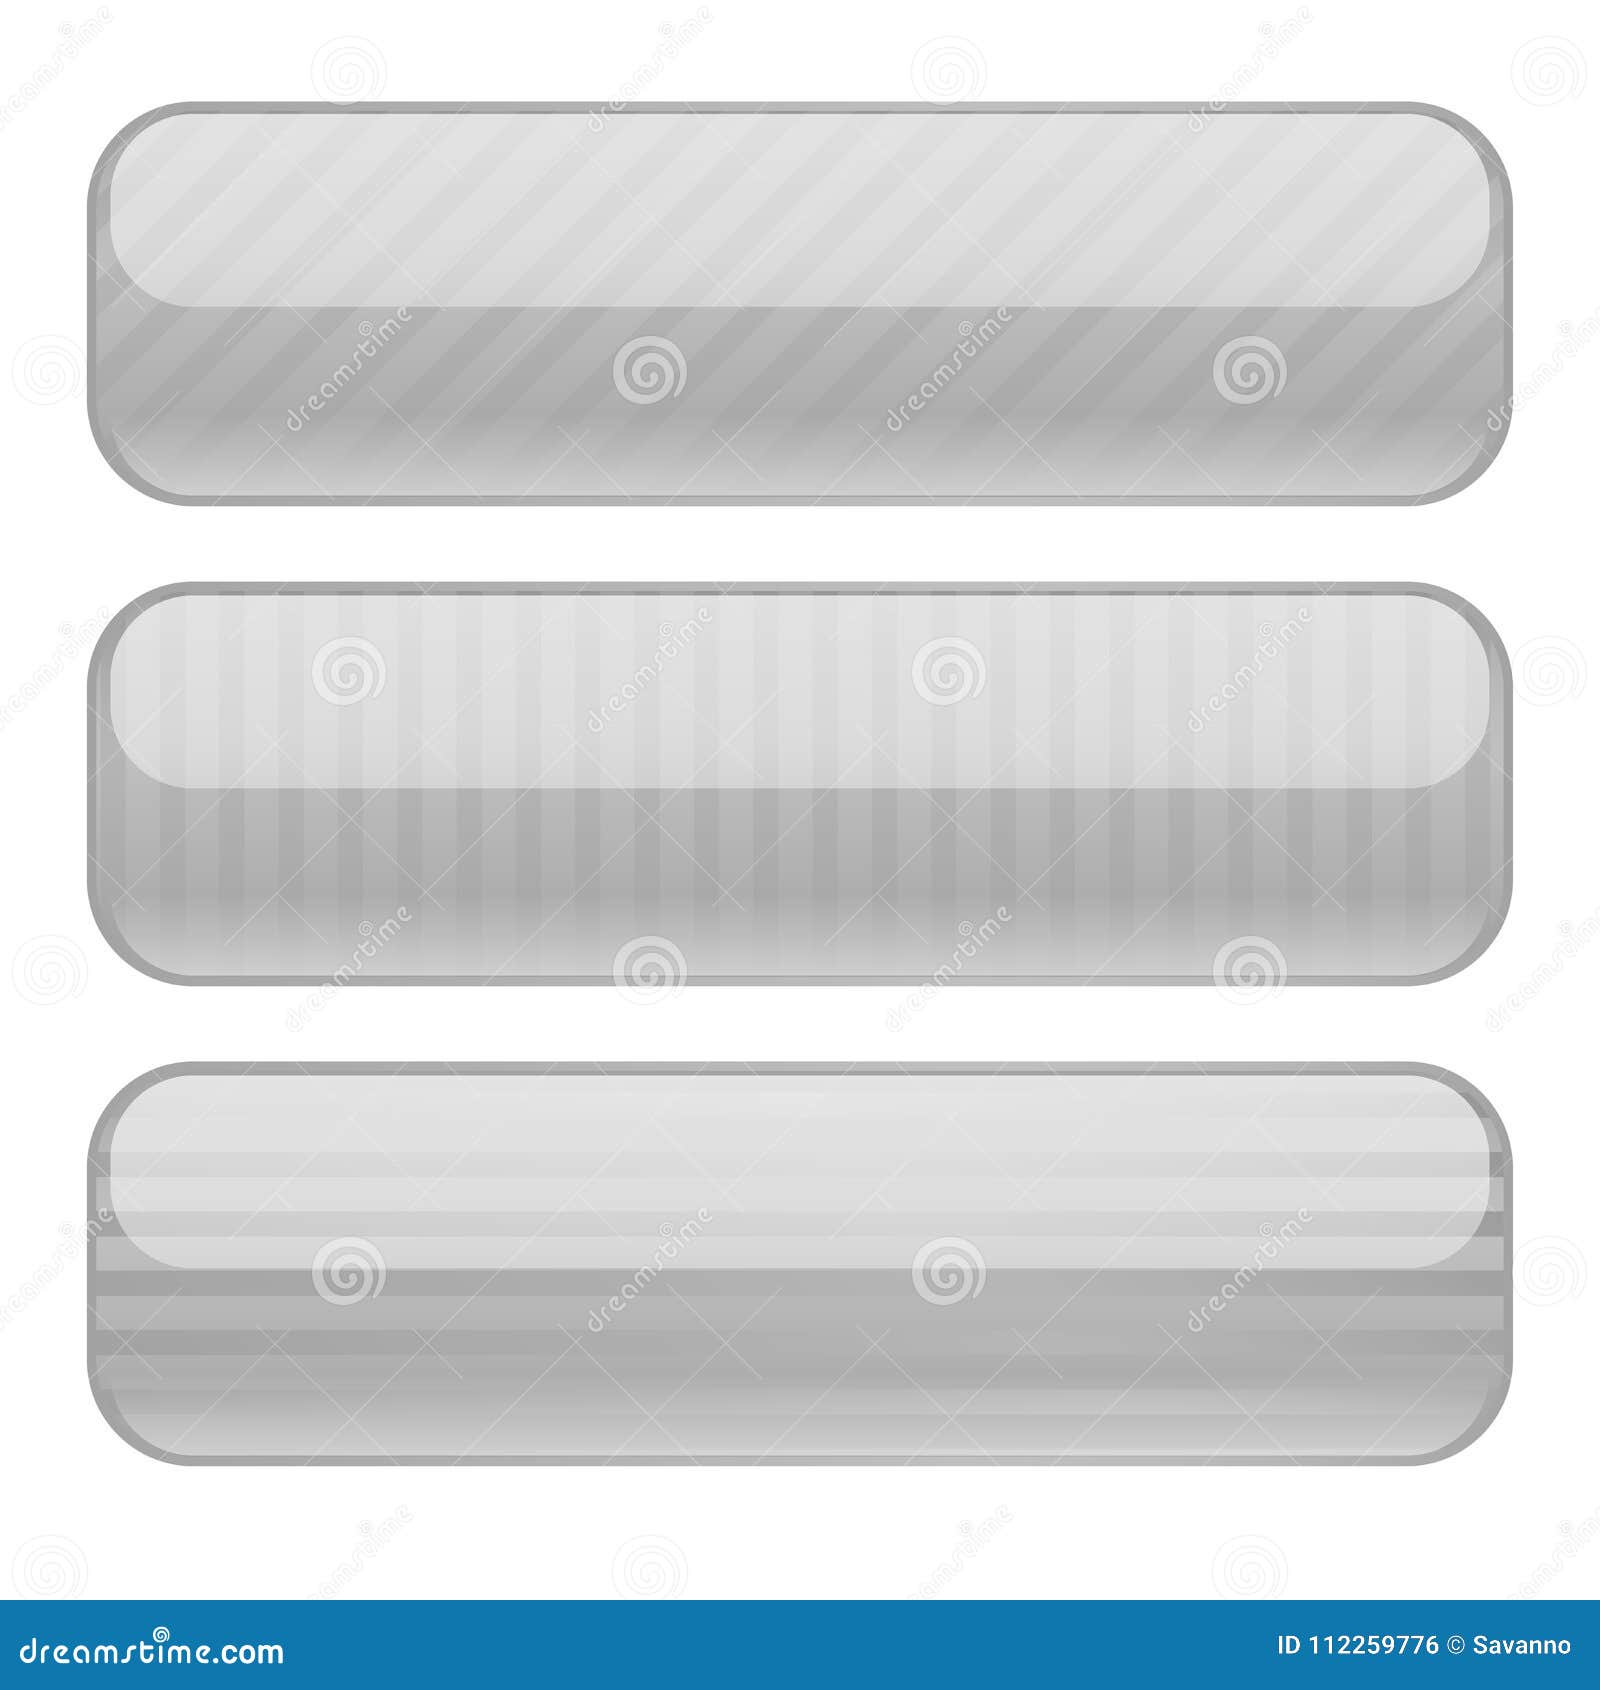 White oval buttons. Blank icons with stripe design. Vector 3d illustration isolated on white background